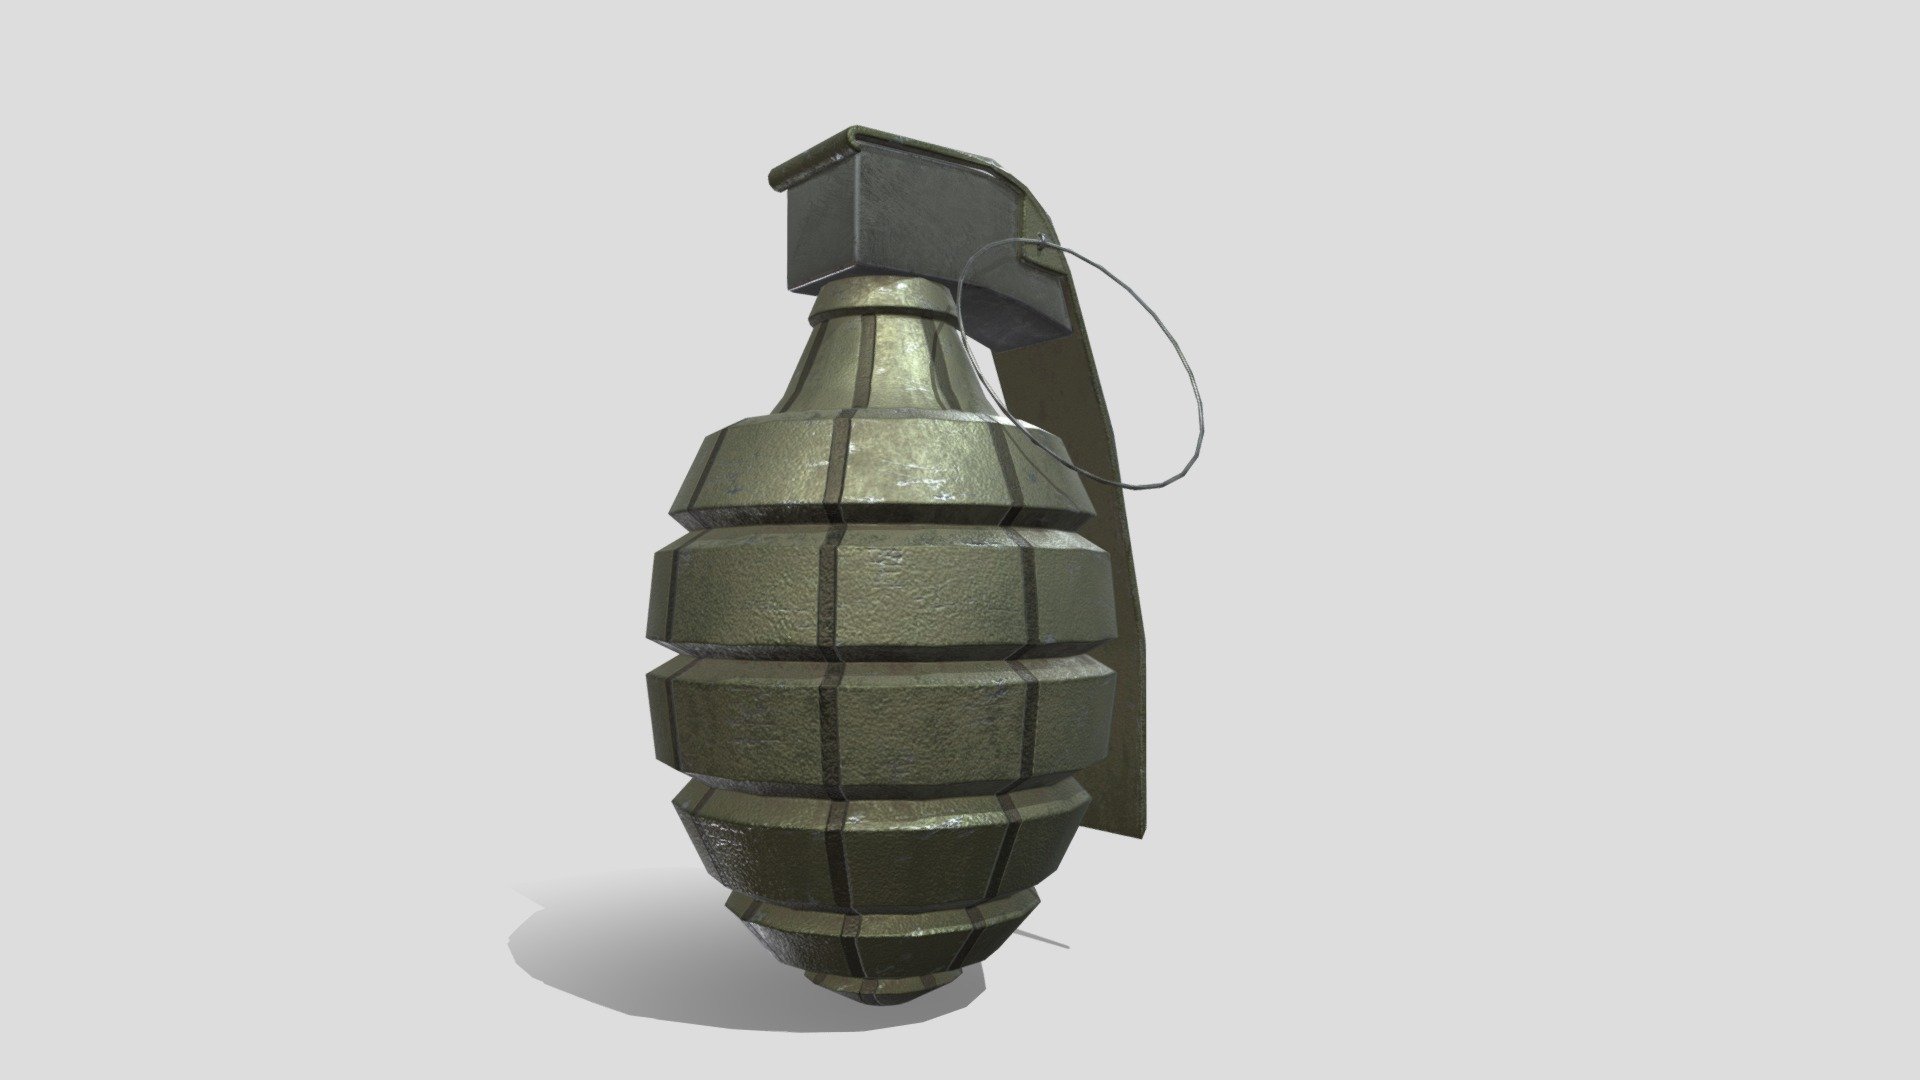 Low Poly World War Grenade. Made by Joe_Gamer for the contest 3d model